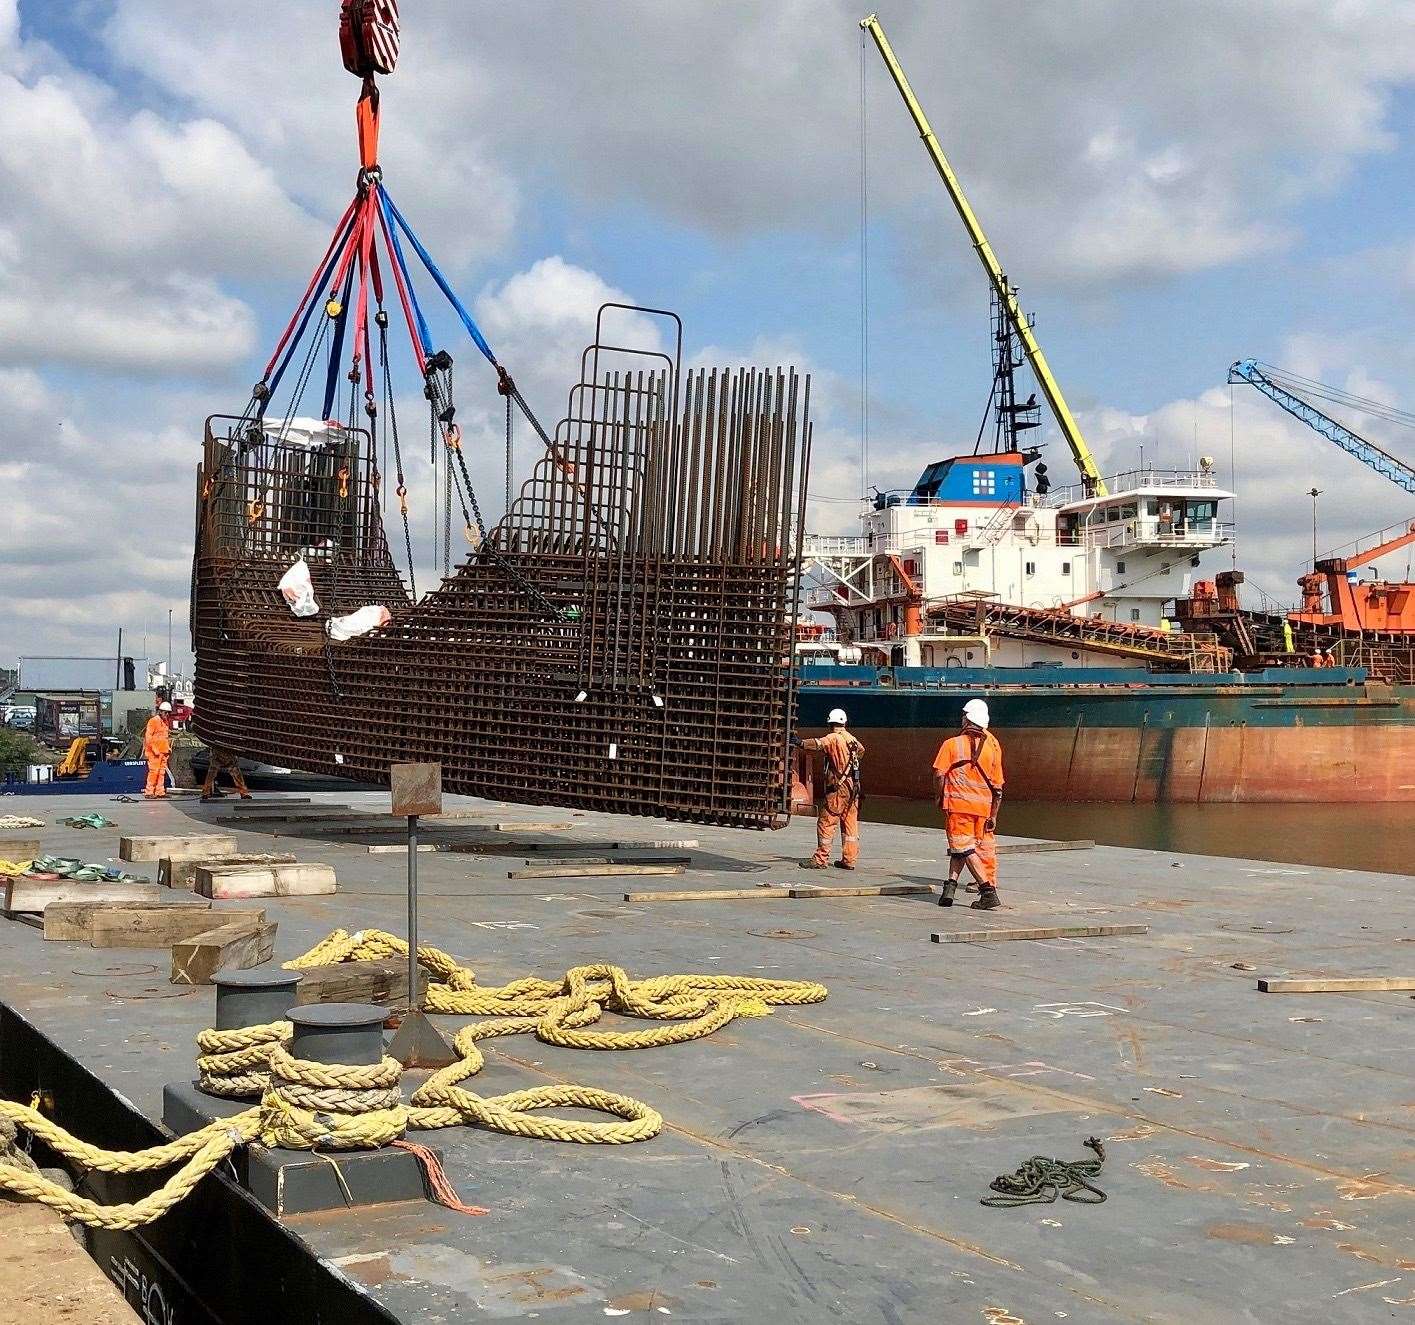 Chatham Docks has more than 800 people full-time employed at the site on the River Medway. Picture: Association of Chatham Docks Commerical Operators